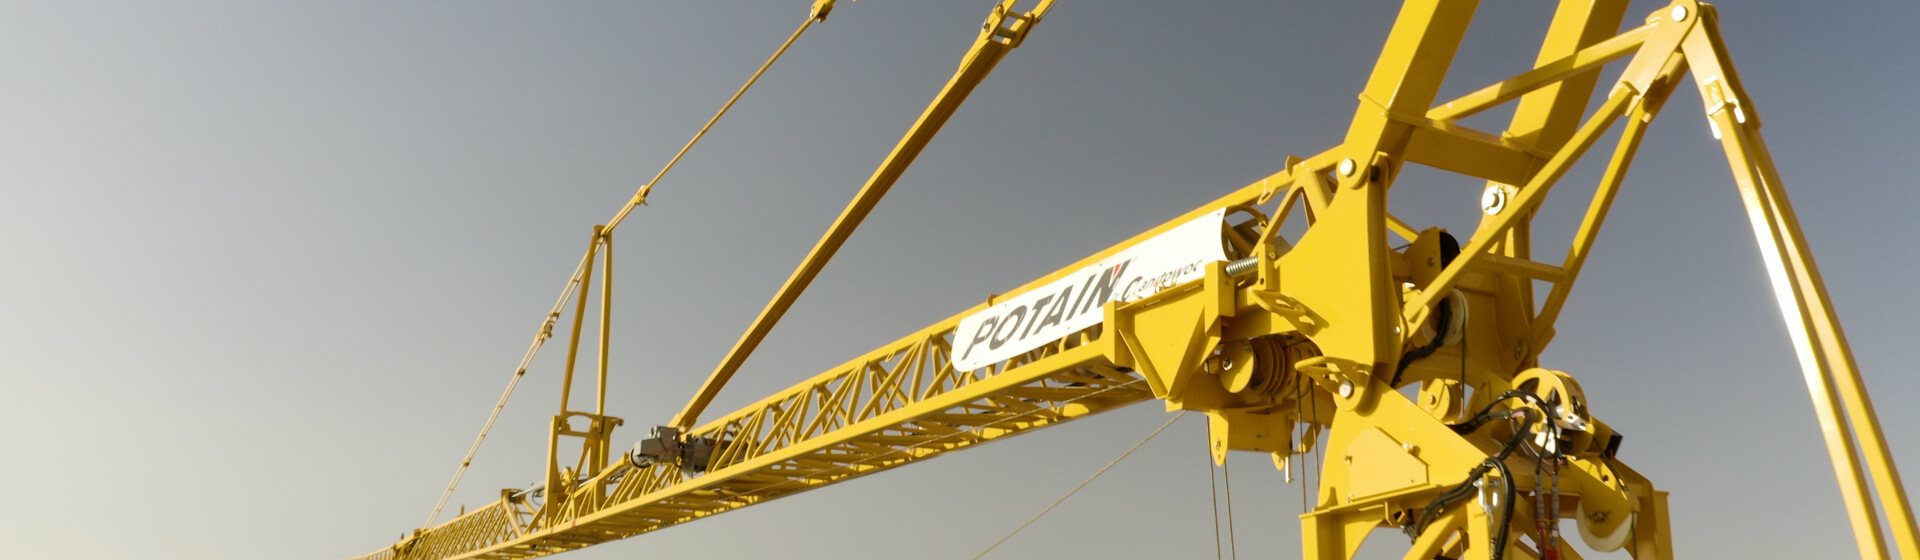 Tower crane: Types, Parts, Price, Capacity, and How to Cope with